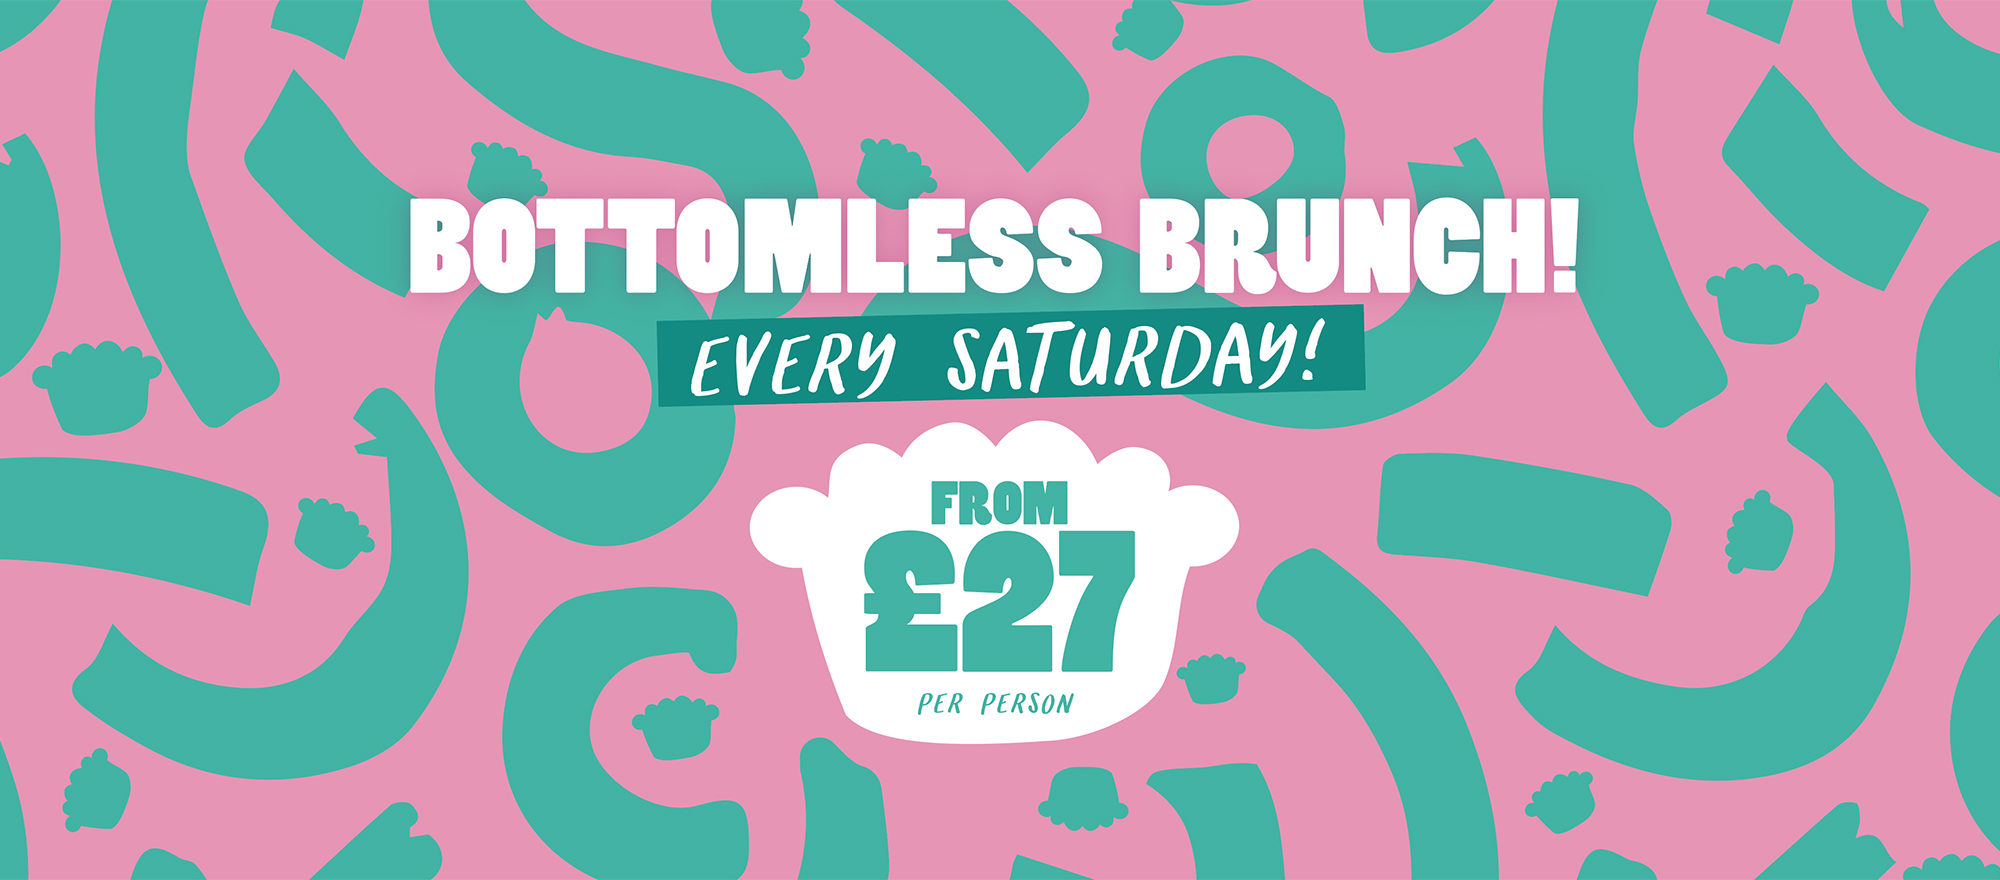 Bottomless Brunch is back!